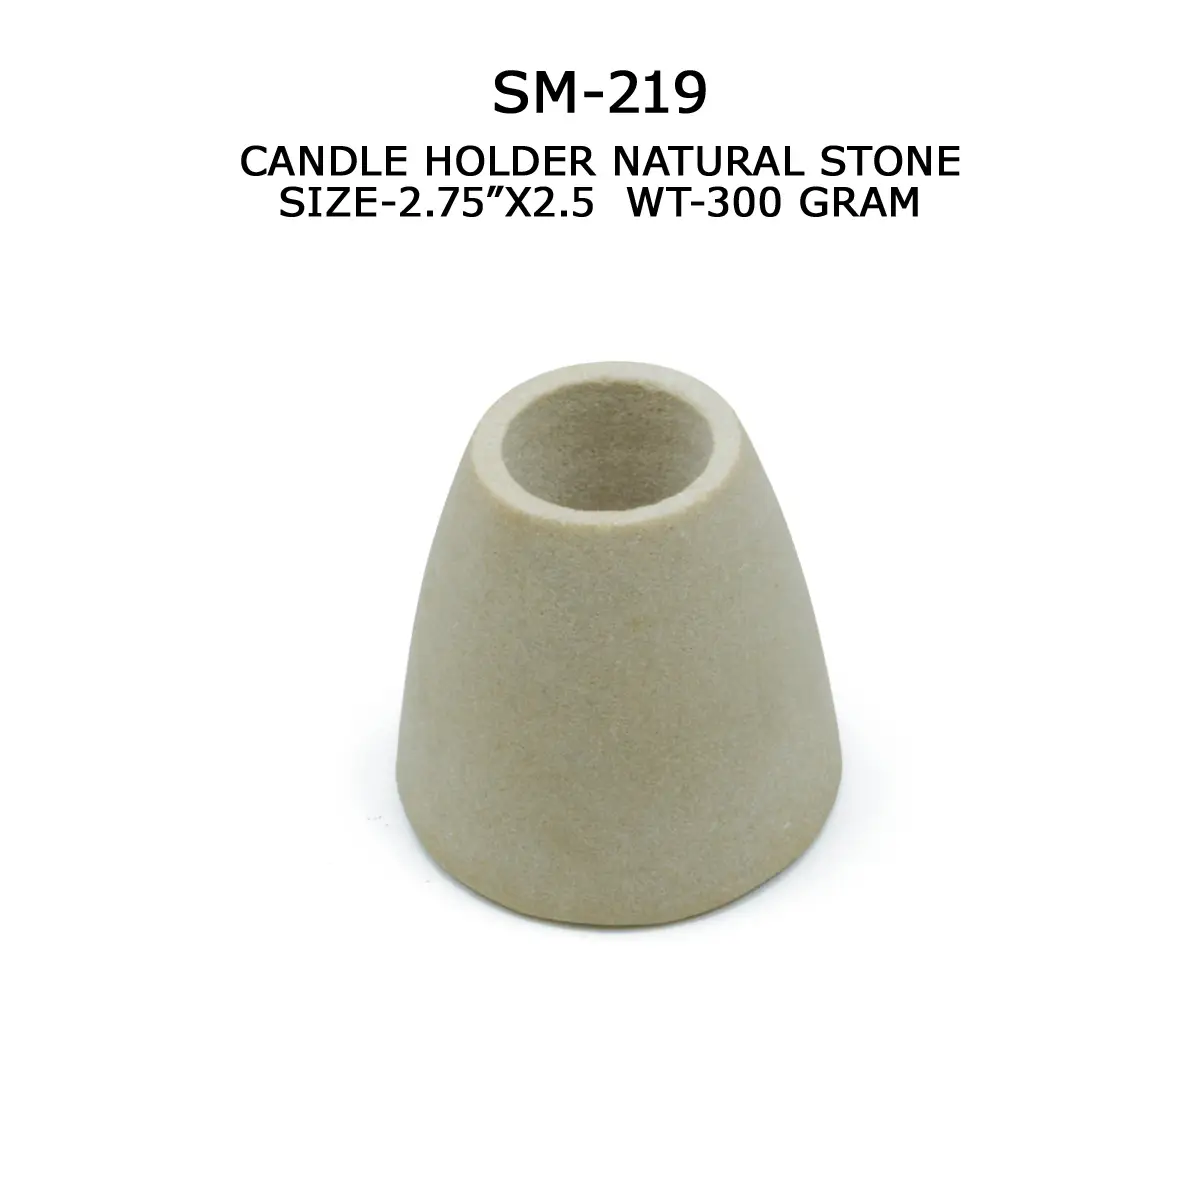 CANDLE HOLDER NATURAL STONE